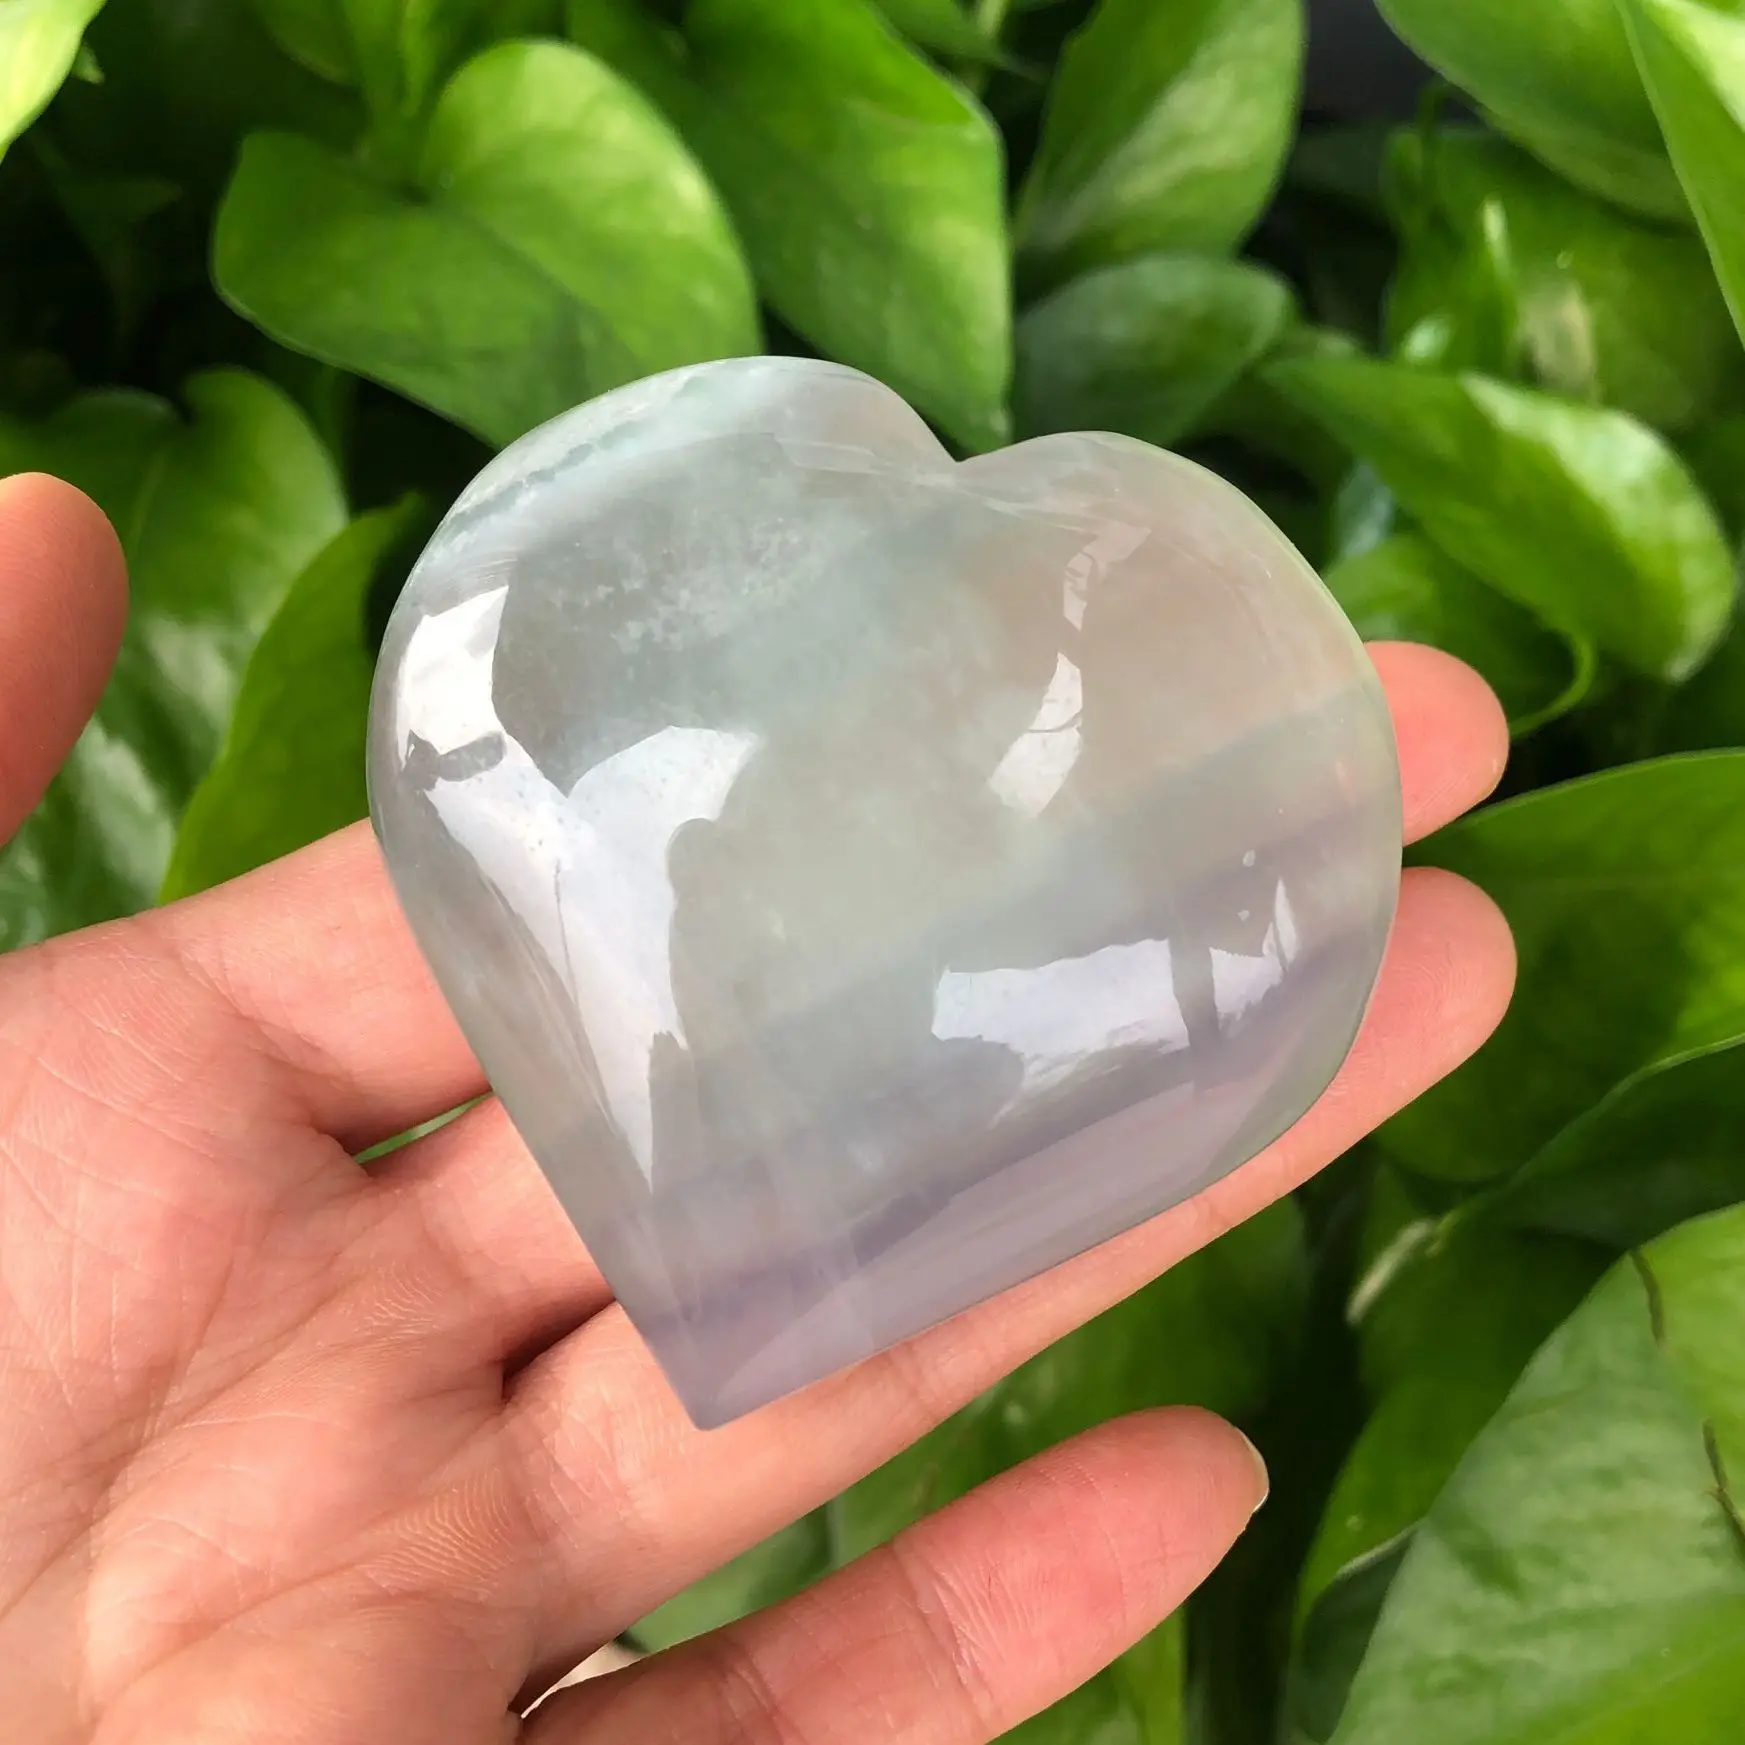 

1PC Natural Jelly fluorite heart Mineral Crystal Guardian Gem Friendship Love Family Home Decoration Study Room Decoration Gift